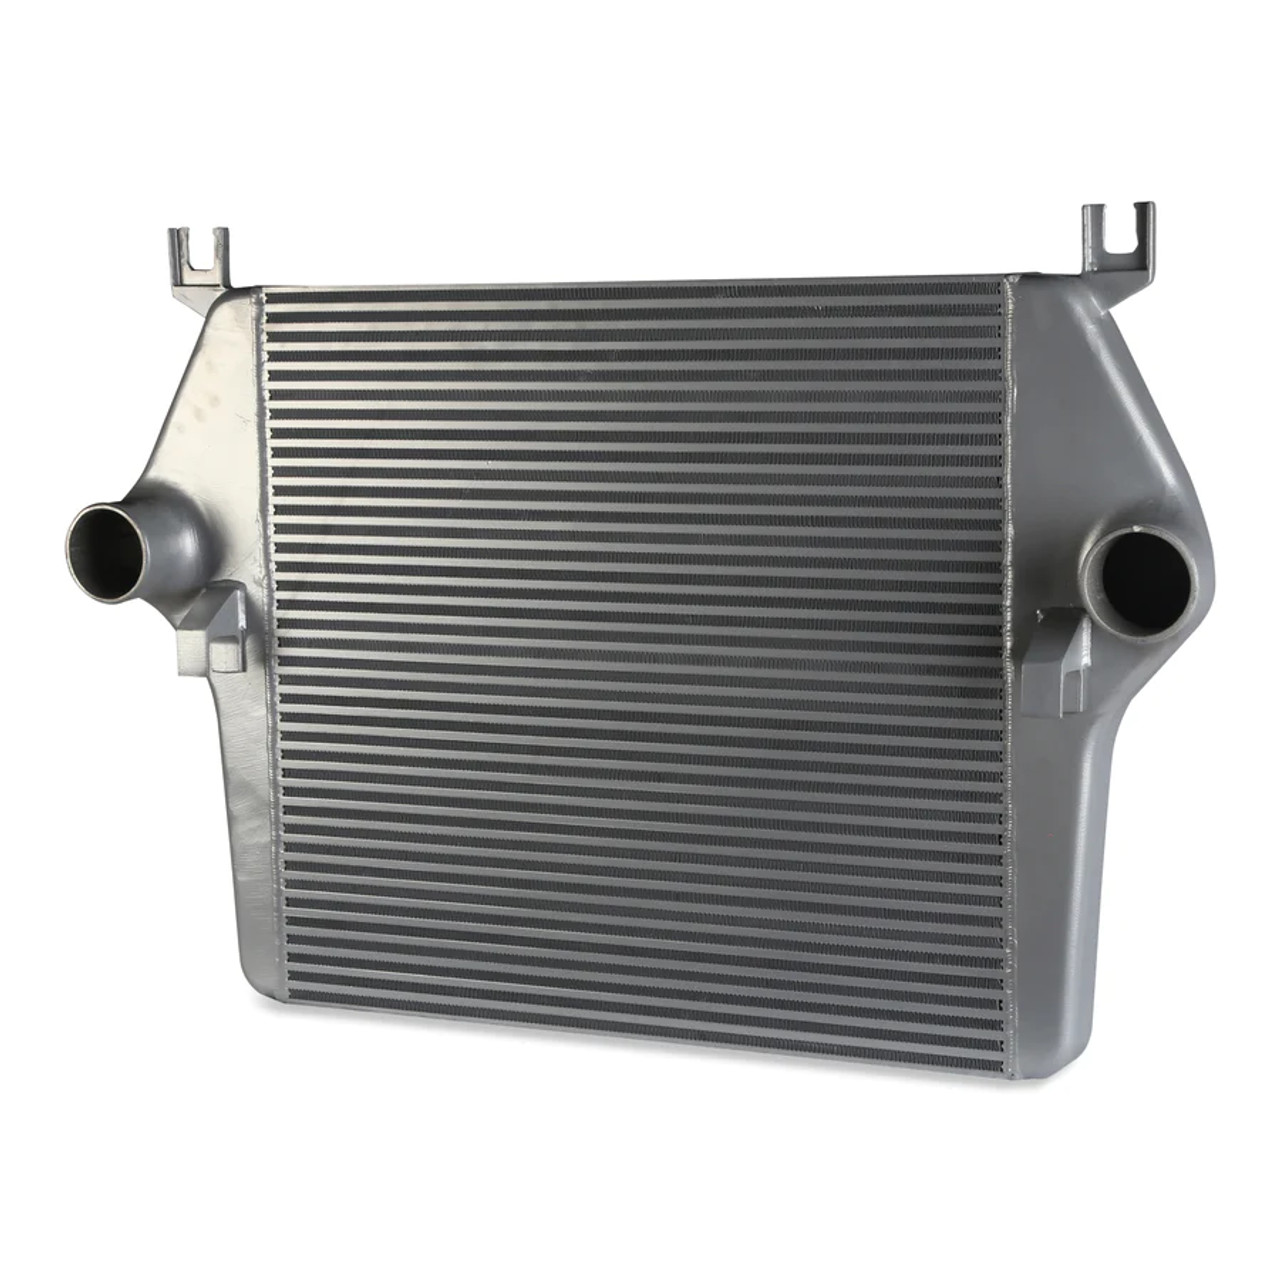 Smeding INTERCOOLER for 2003 to 2009 Dodge 5.9/6.7L CUMMINS - New View